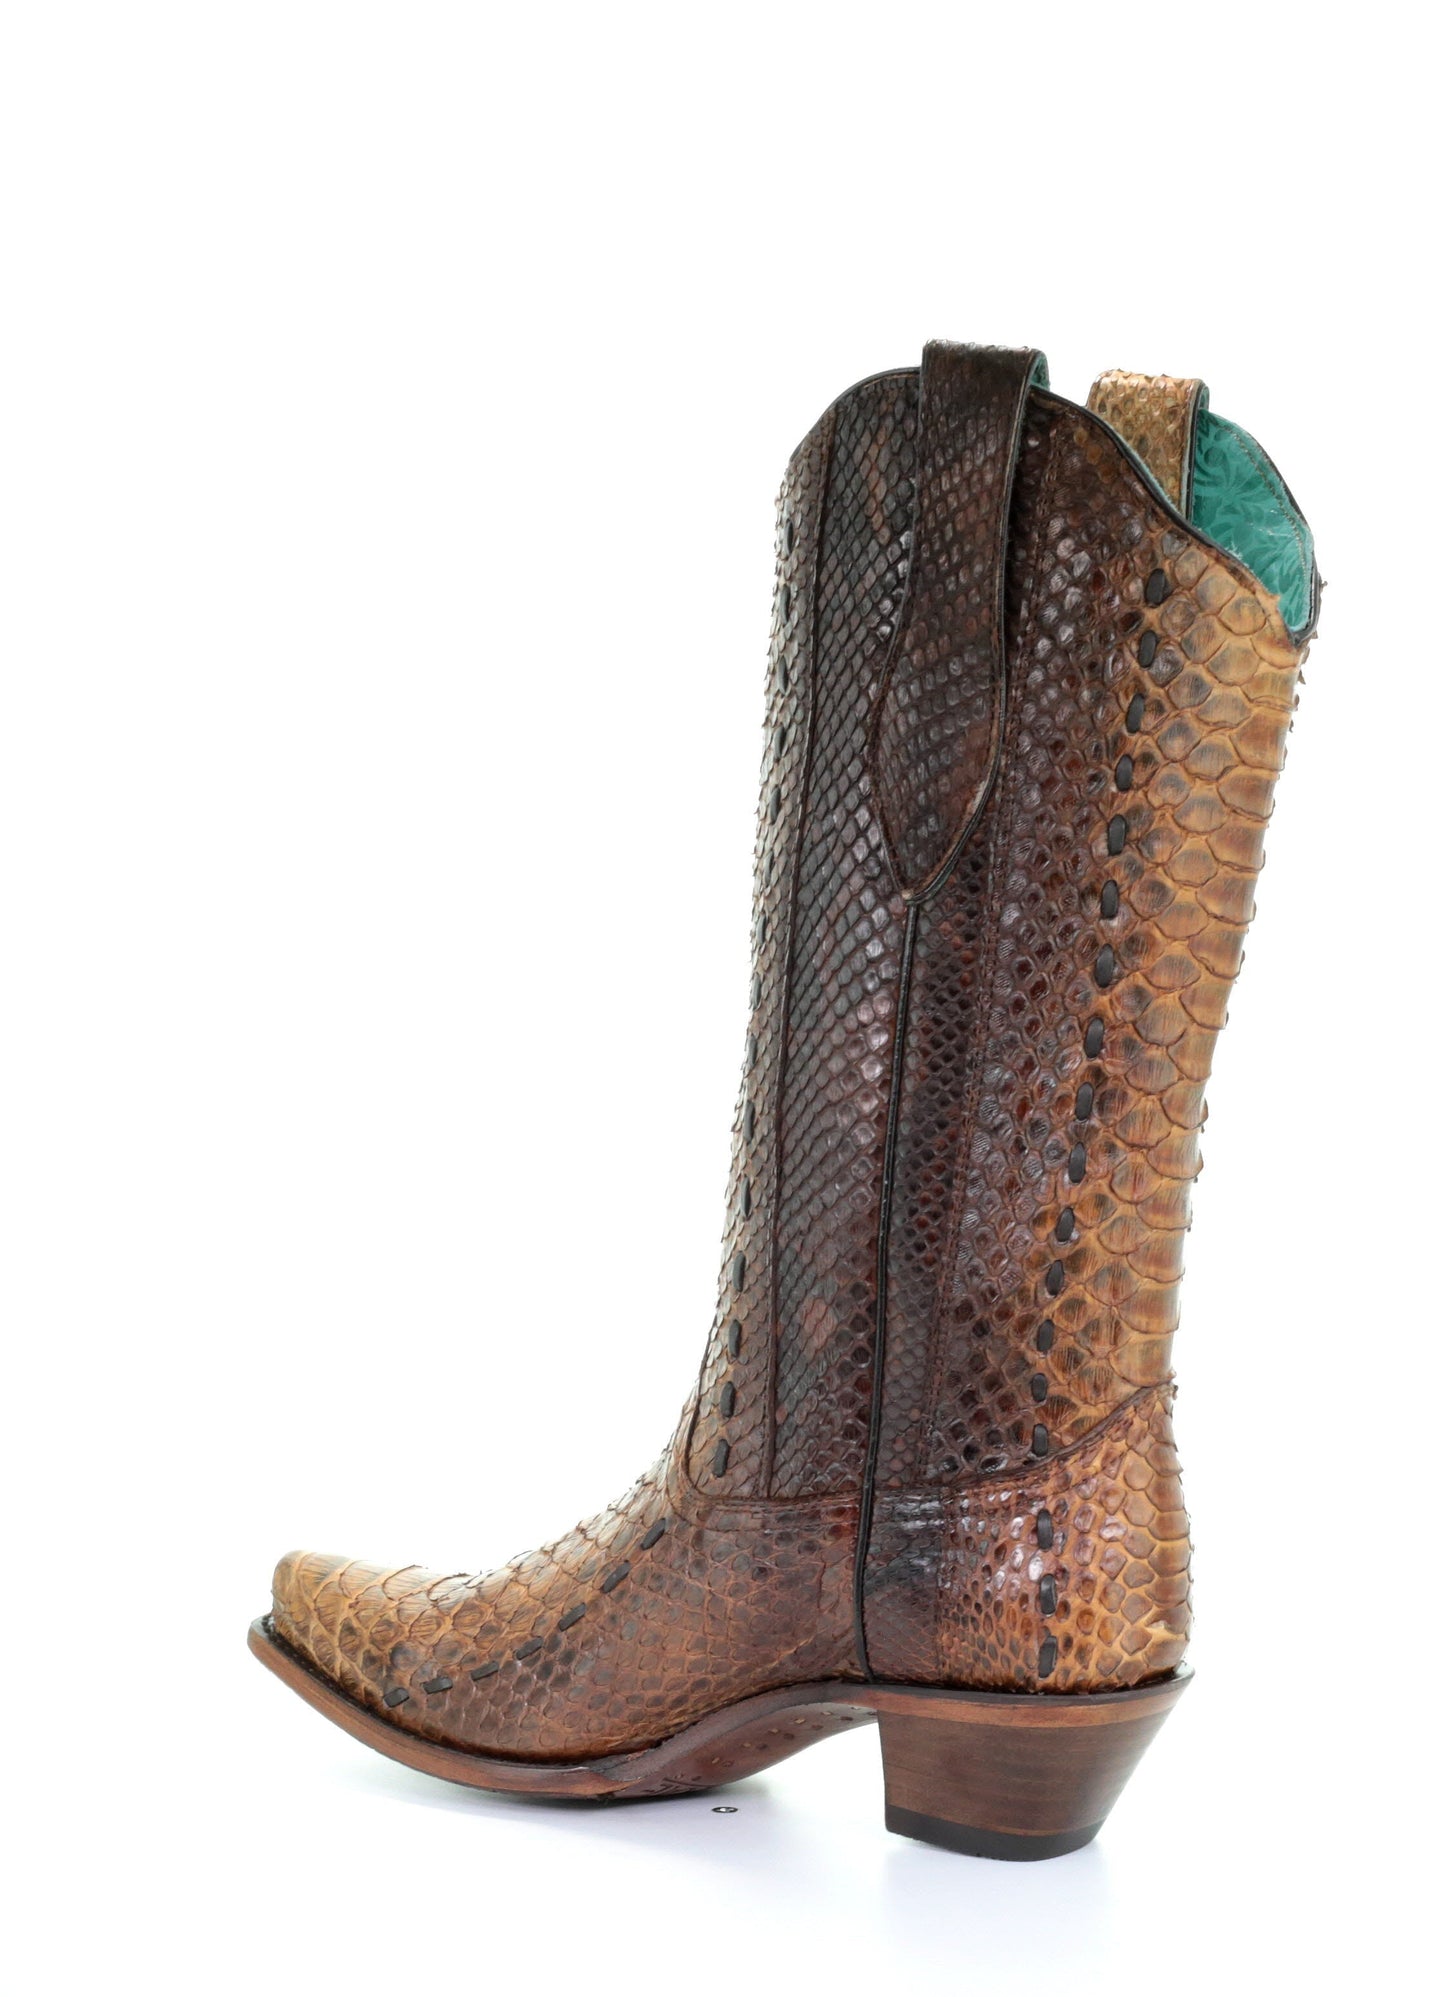 A3659 - Corral brown western cowboy python leather boots for women-Kuet.us